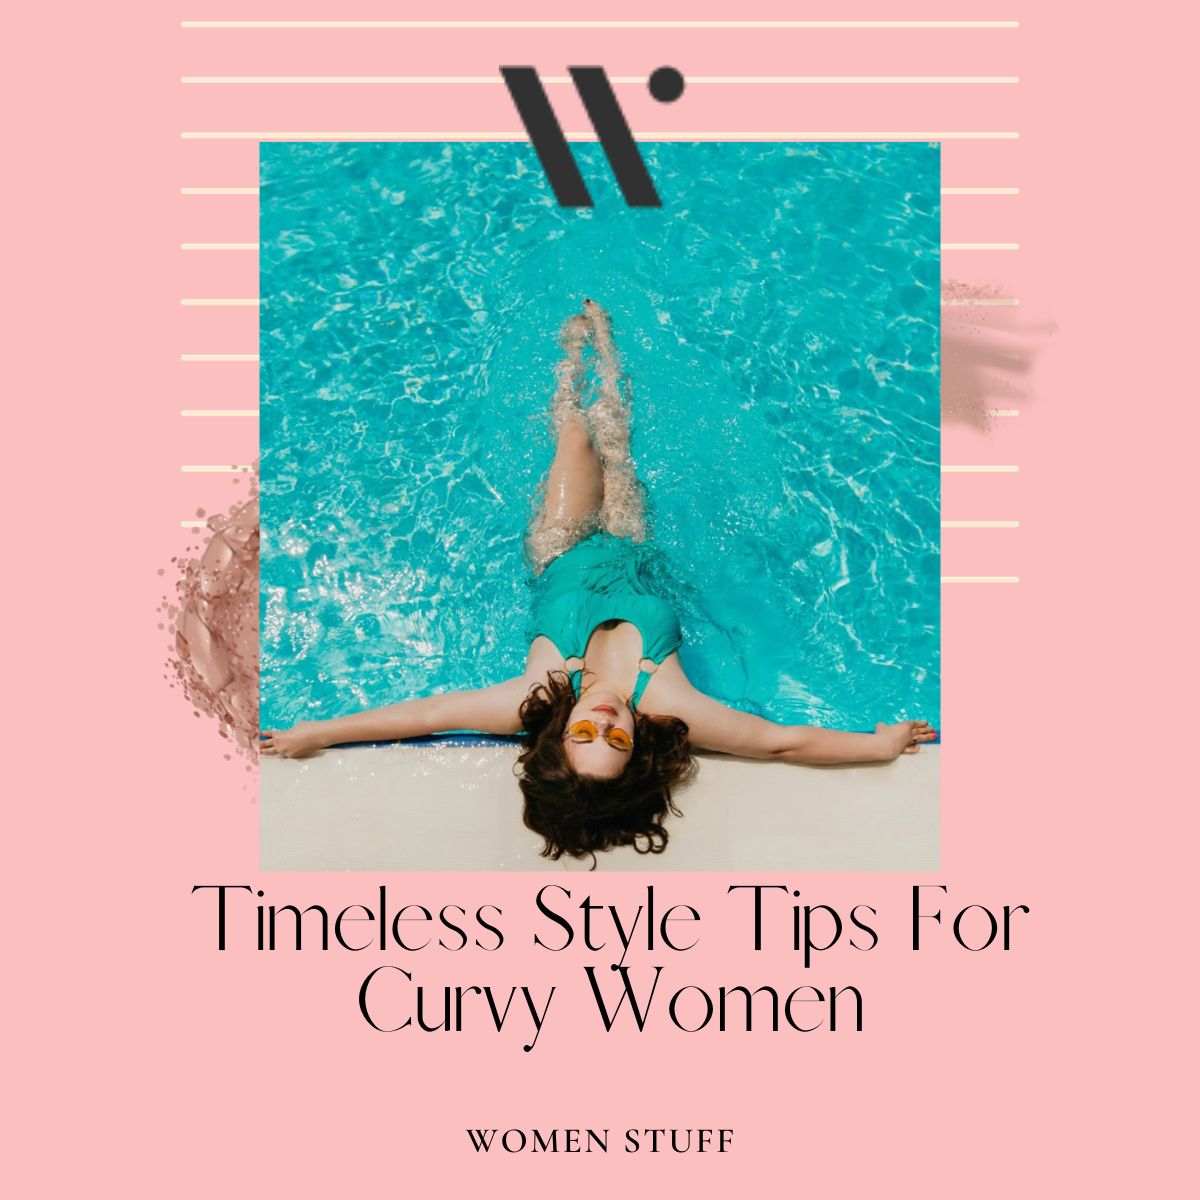 7 Timeless Style Tips For Curvy Women